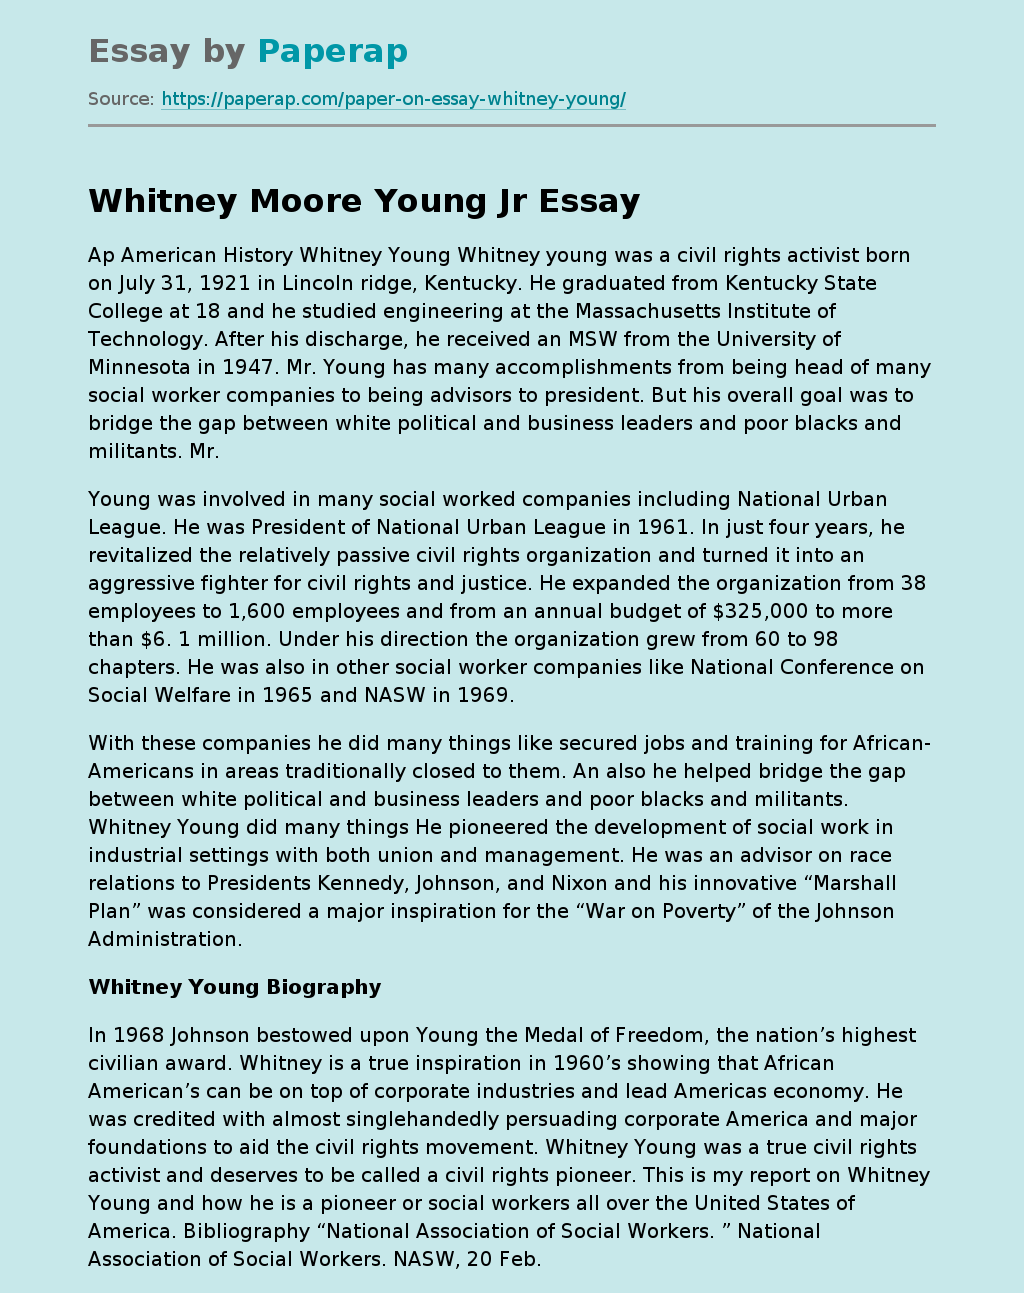 Civil Rights Activist Whitney Young